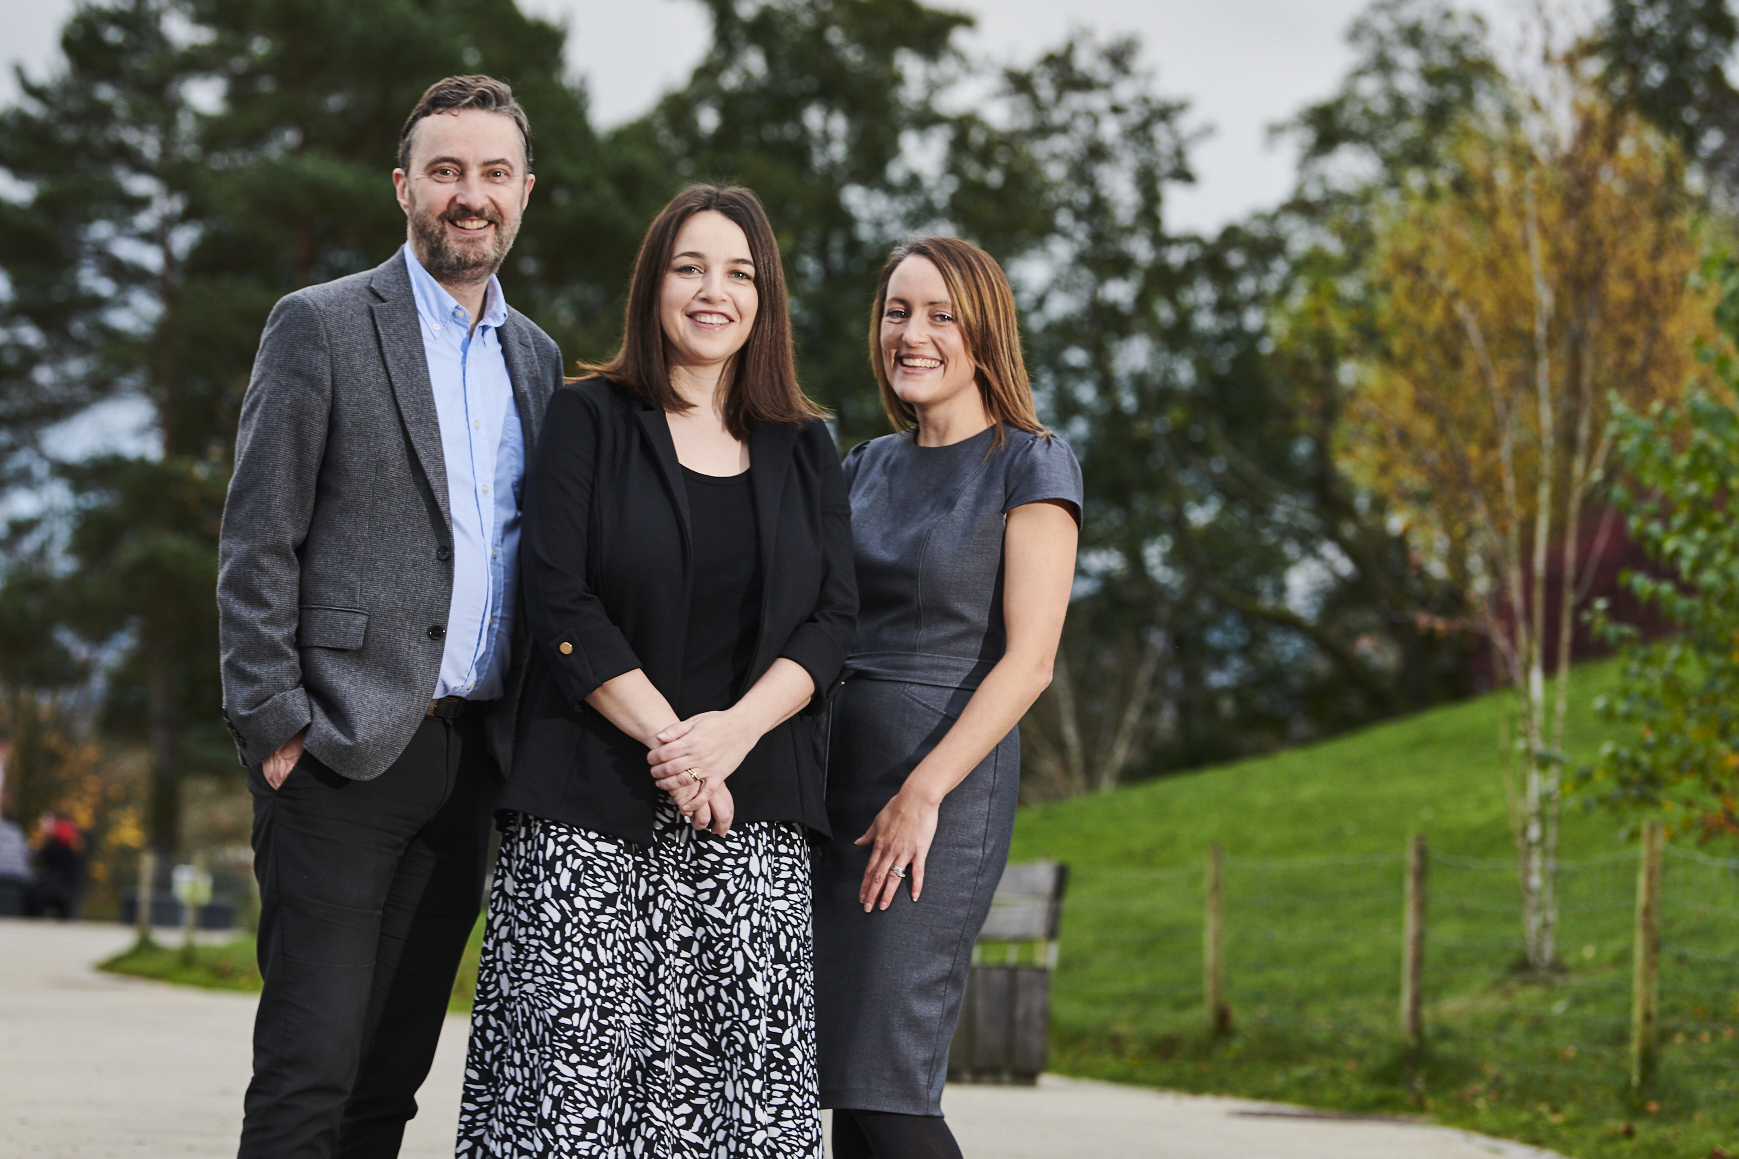 Law firm recruits conveyancer amid rising demand for homes